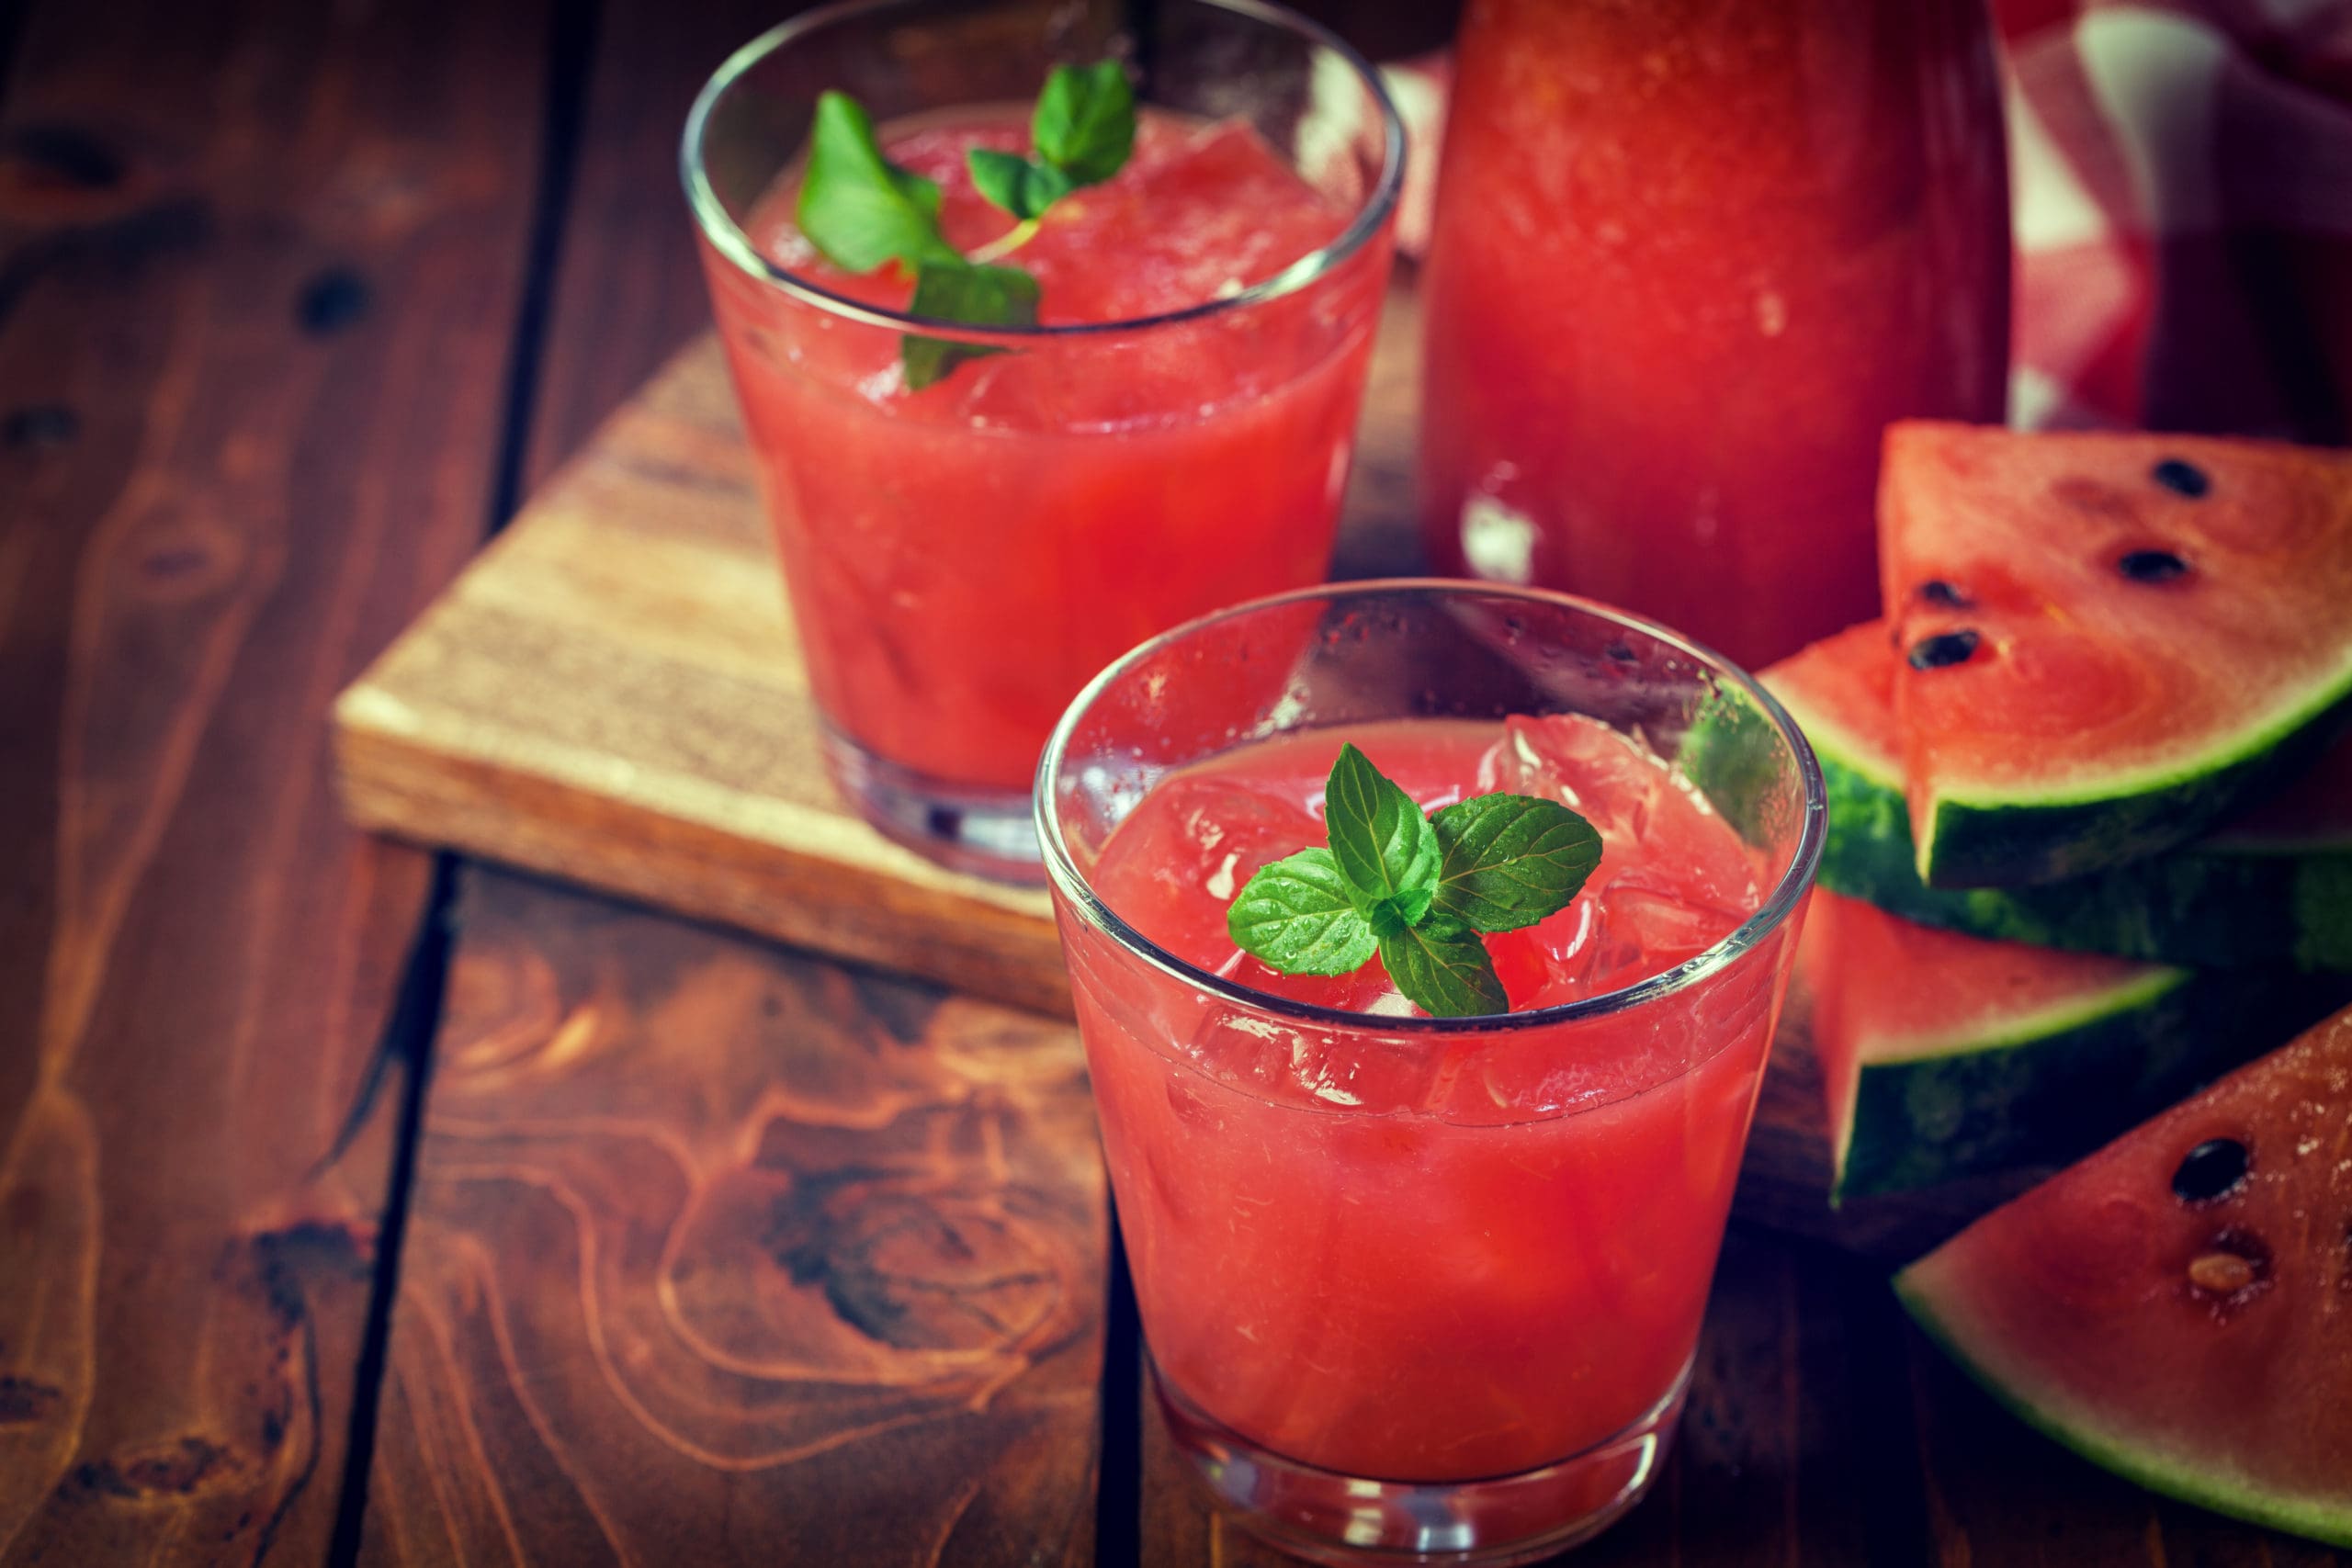 Two glasses filled with blended watermelon cooler and garnished with mint sit on a wooden table with watermelon slices in the background to the right.